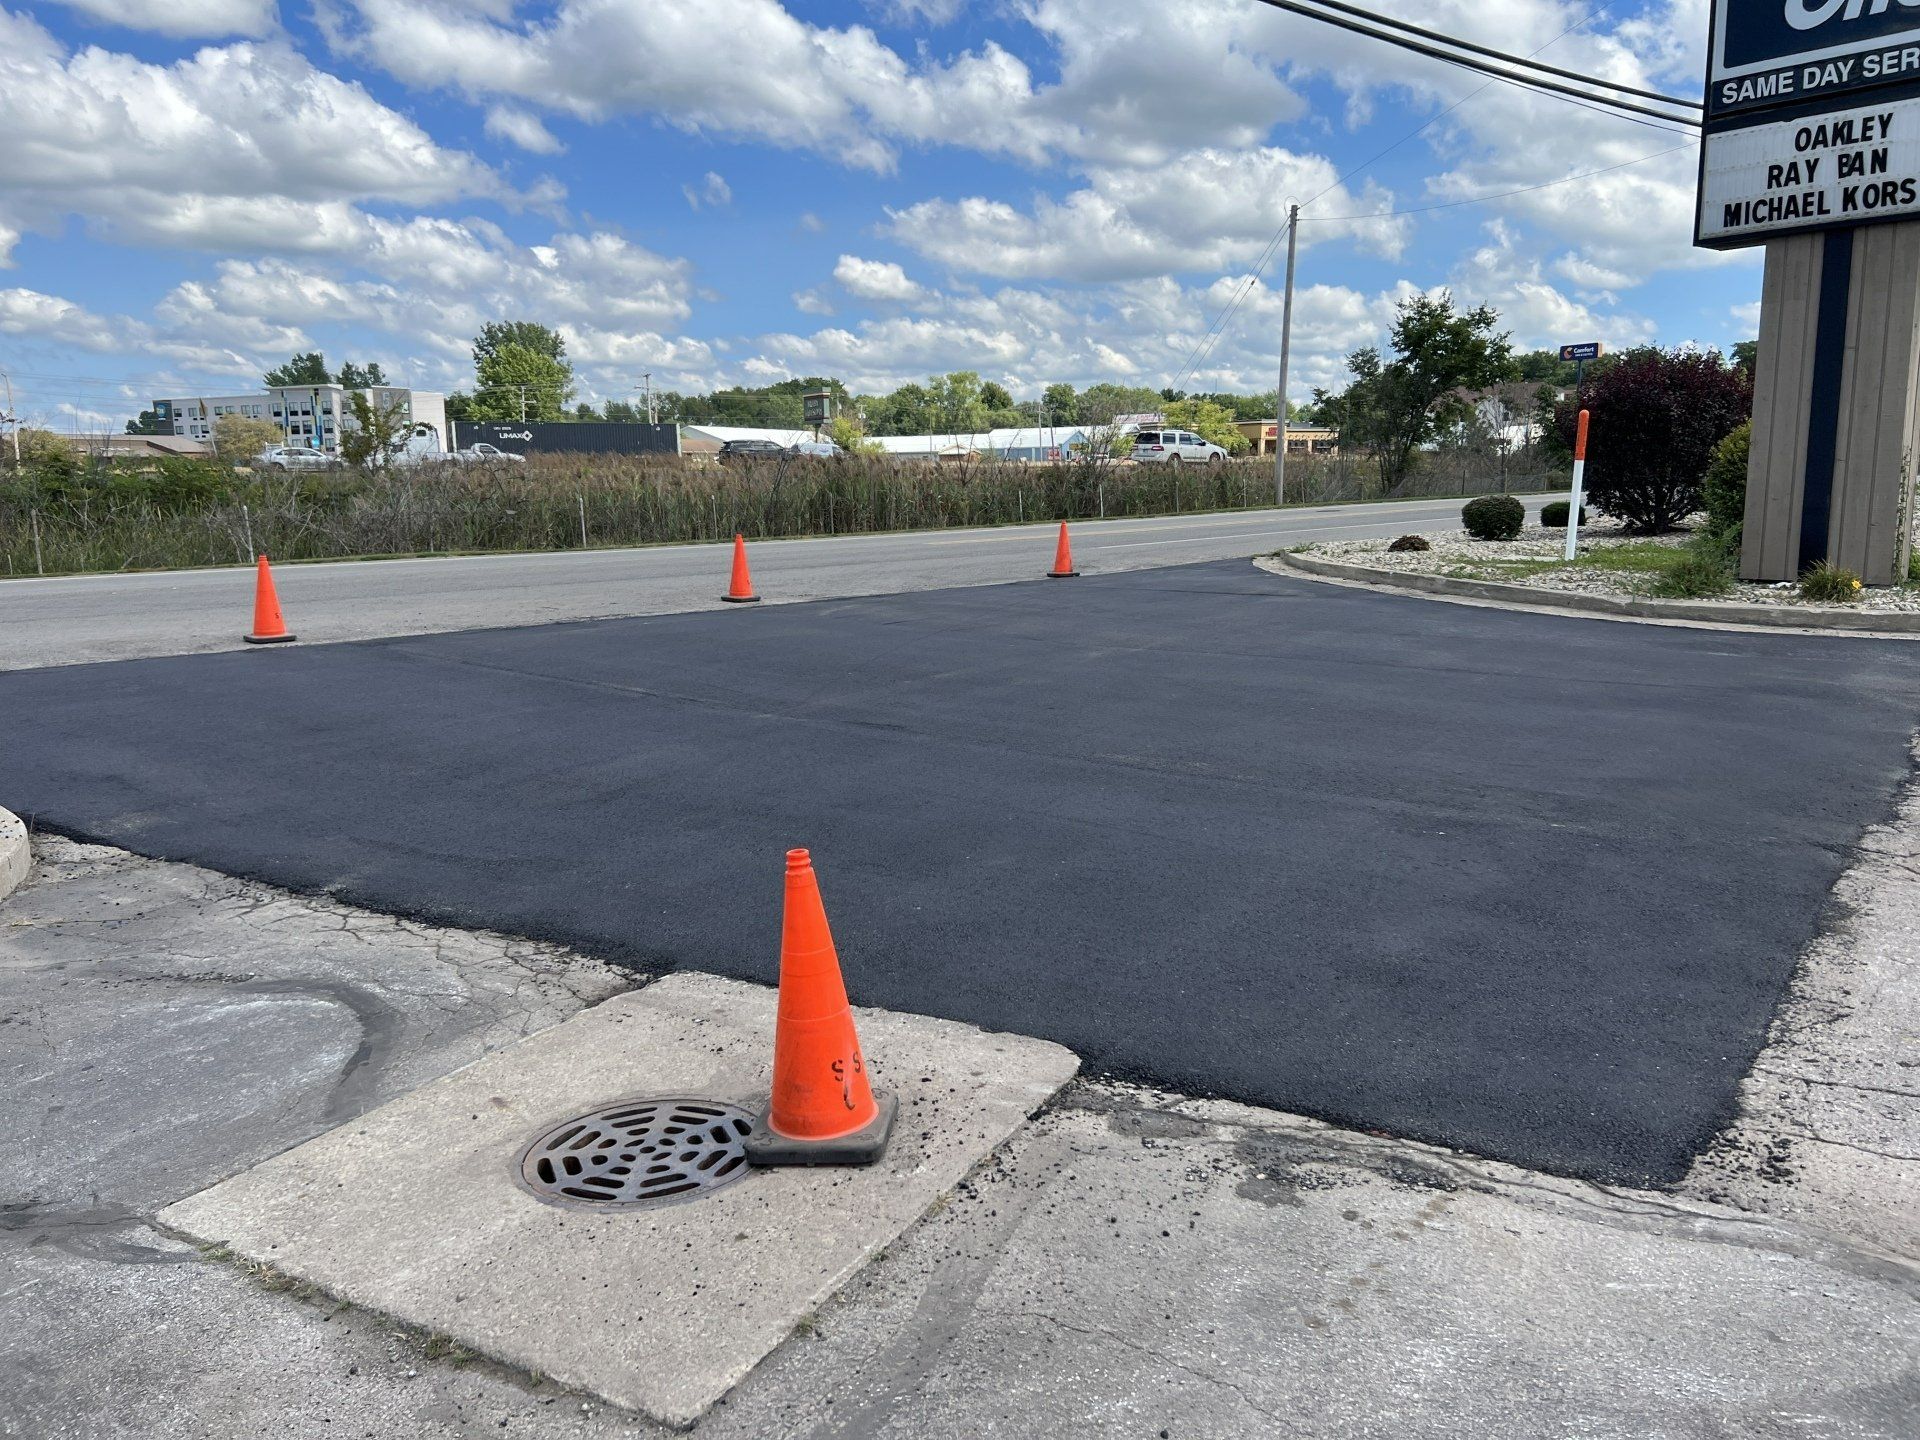 Milled out two inches and replaced two inches of asphalt in Warsaw, IN